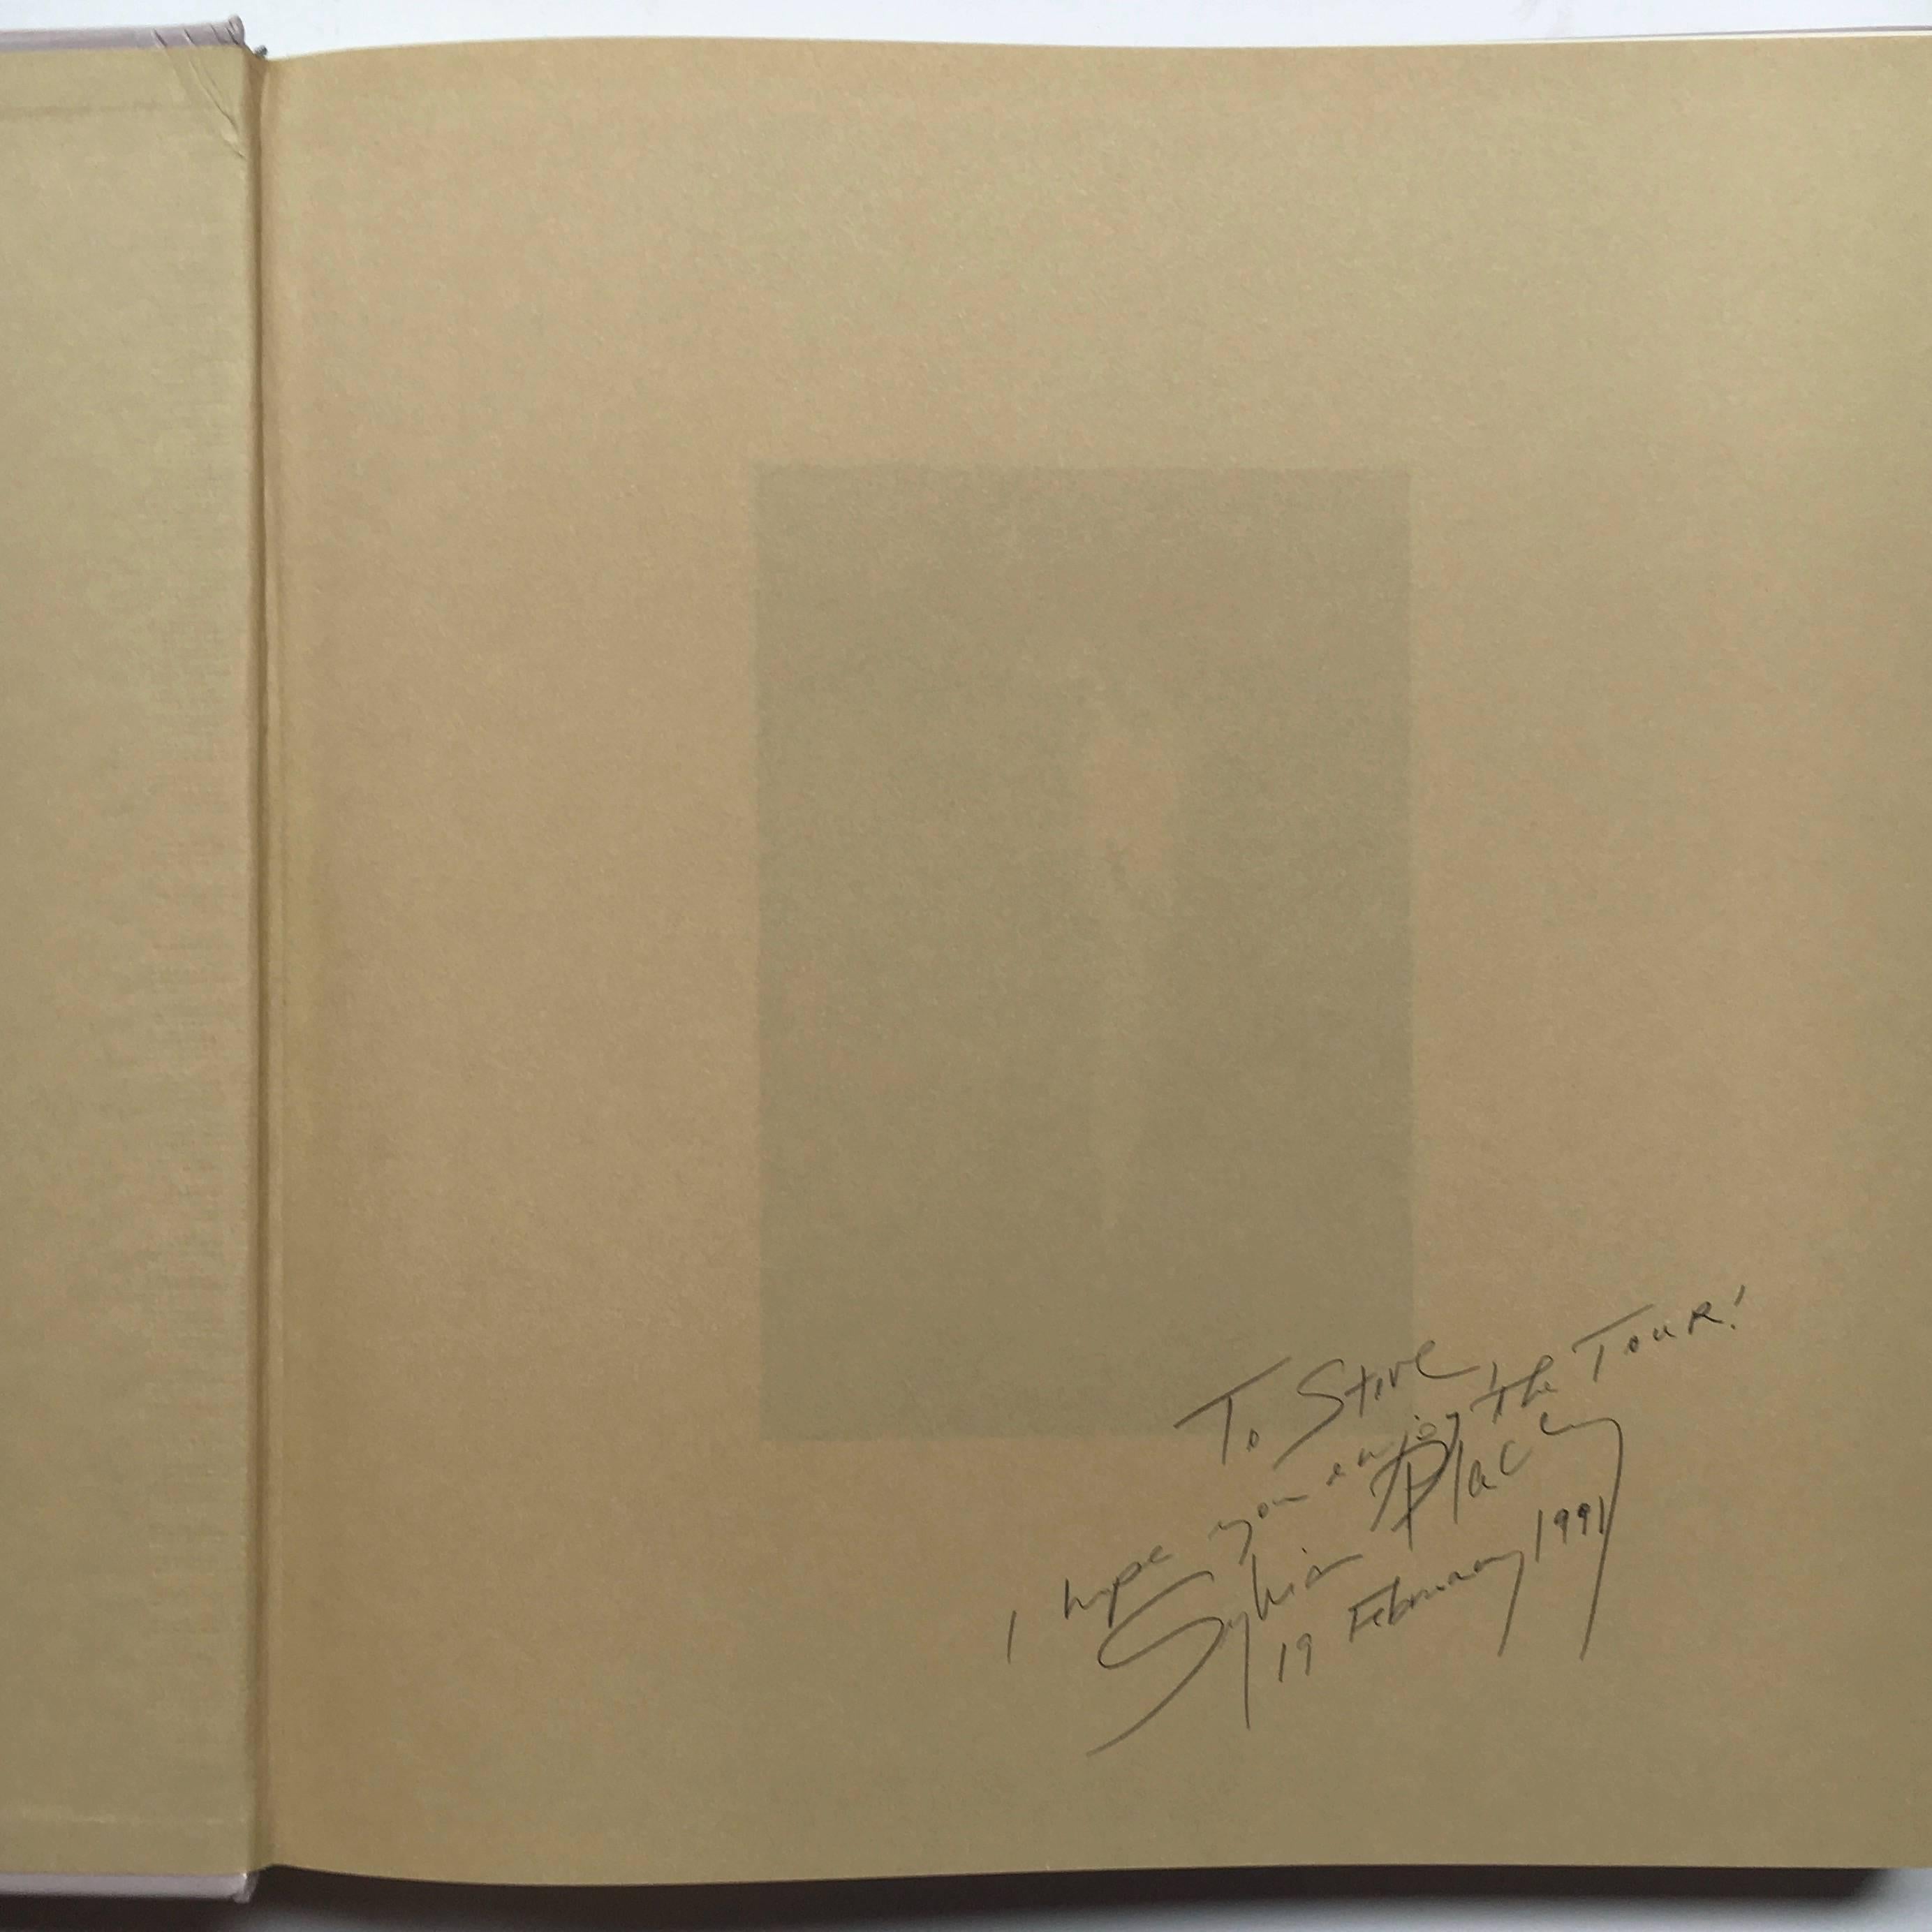 British Sylvia Plachy, Unguided Tour Book, Signed, 1990